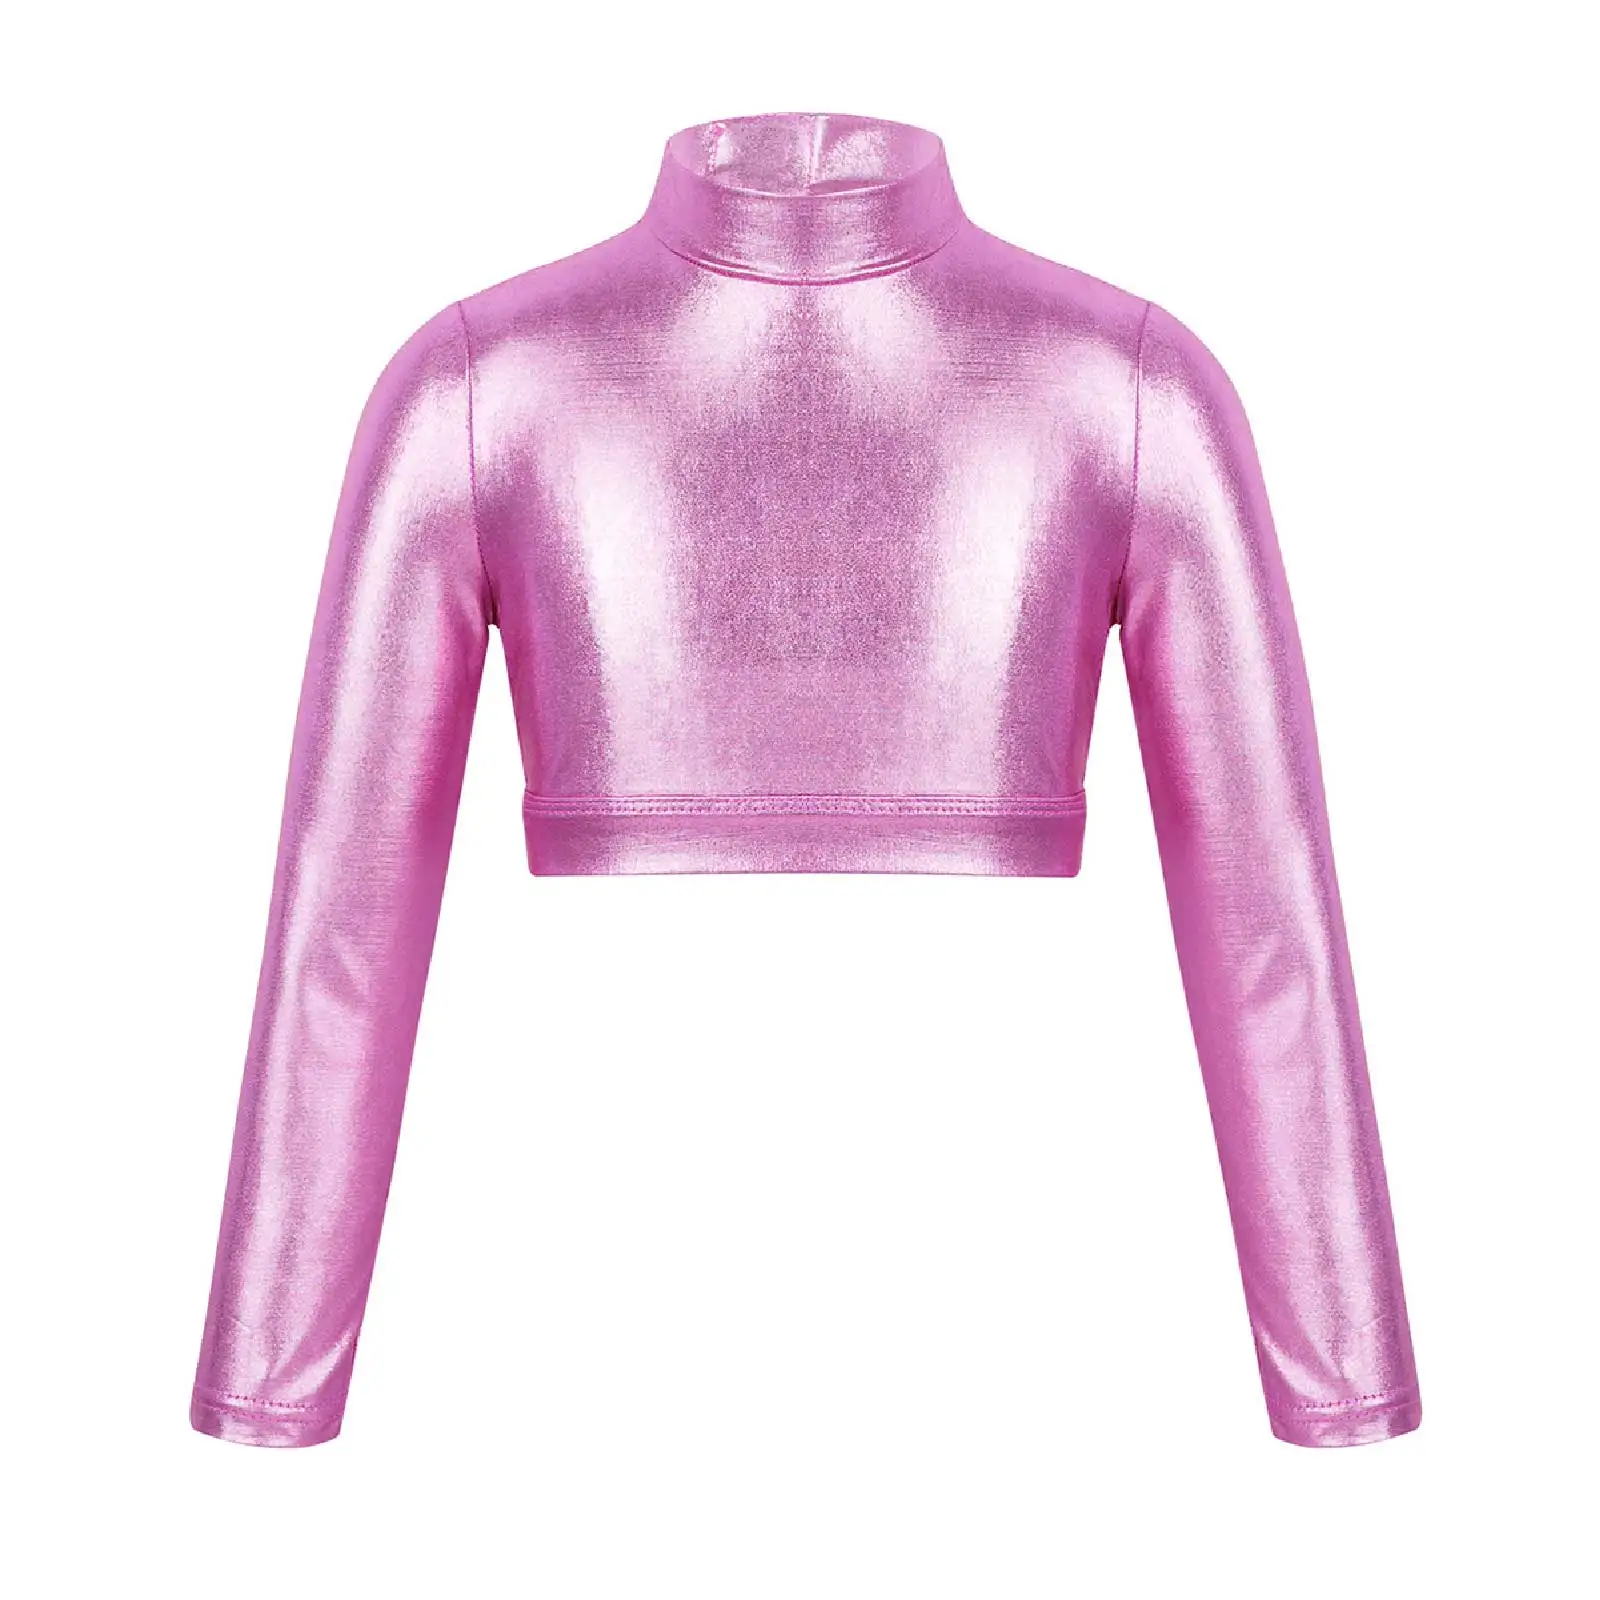 Long Sleeves Glossy Shiny Metallic Crop Top Kids Girls Rave Outfits T-Shirts Mock Neck Short Crop Tops Workout Stage Performance